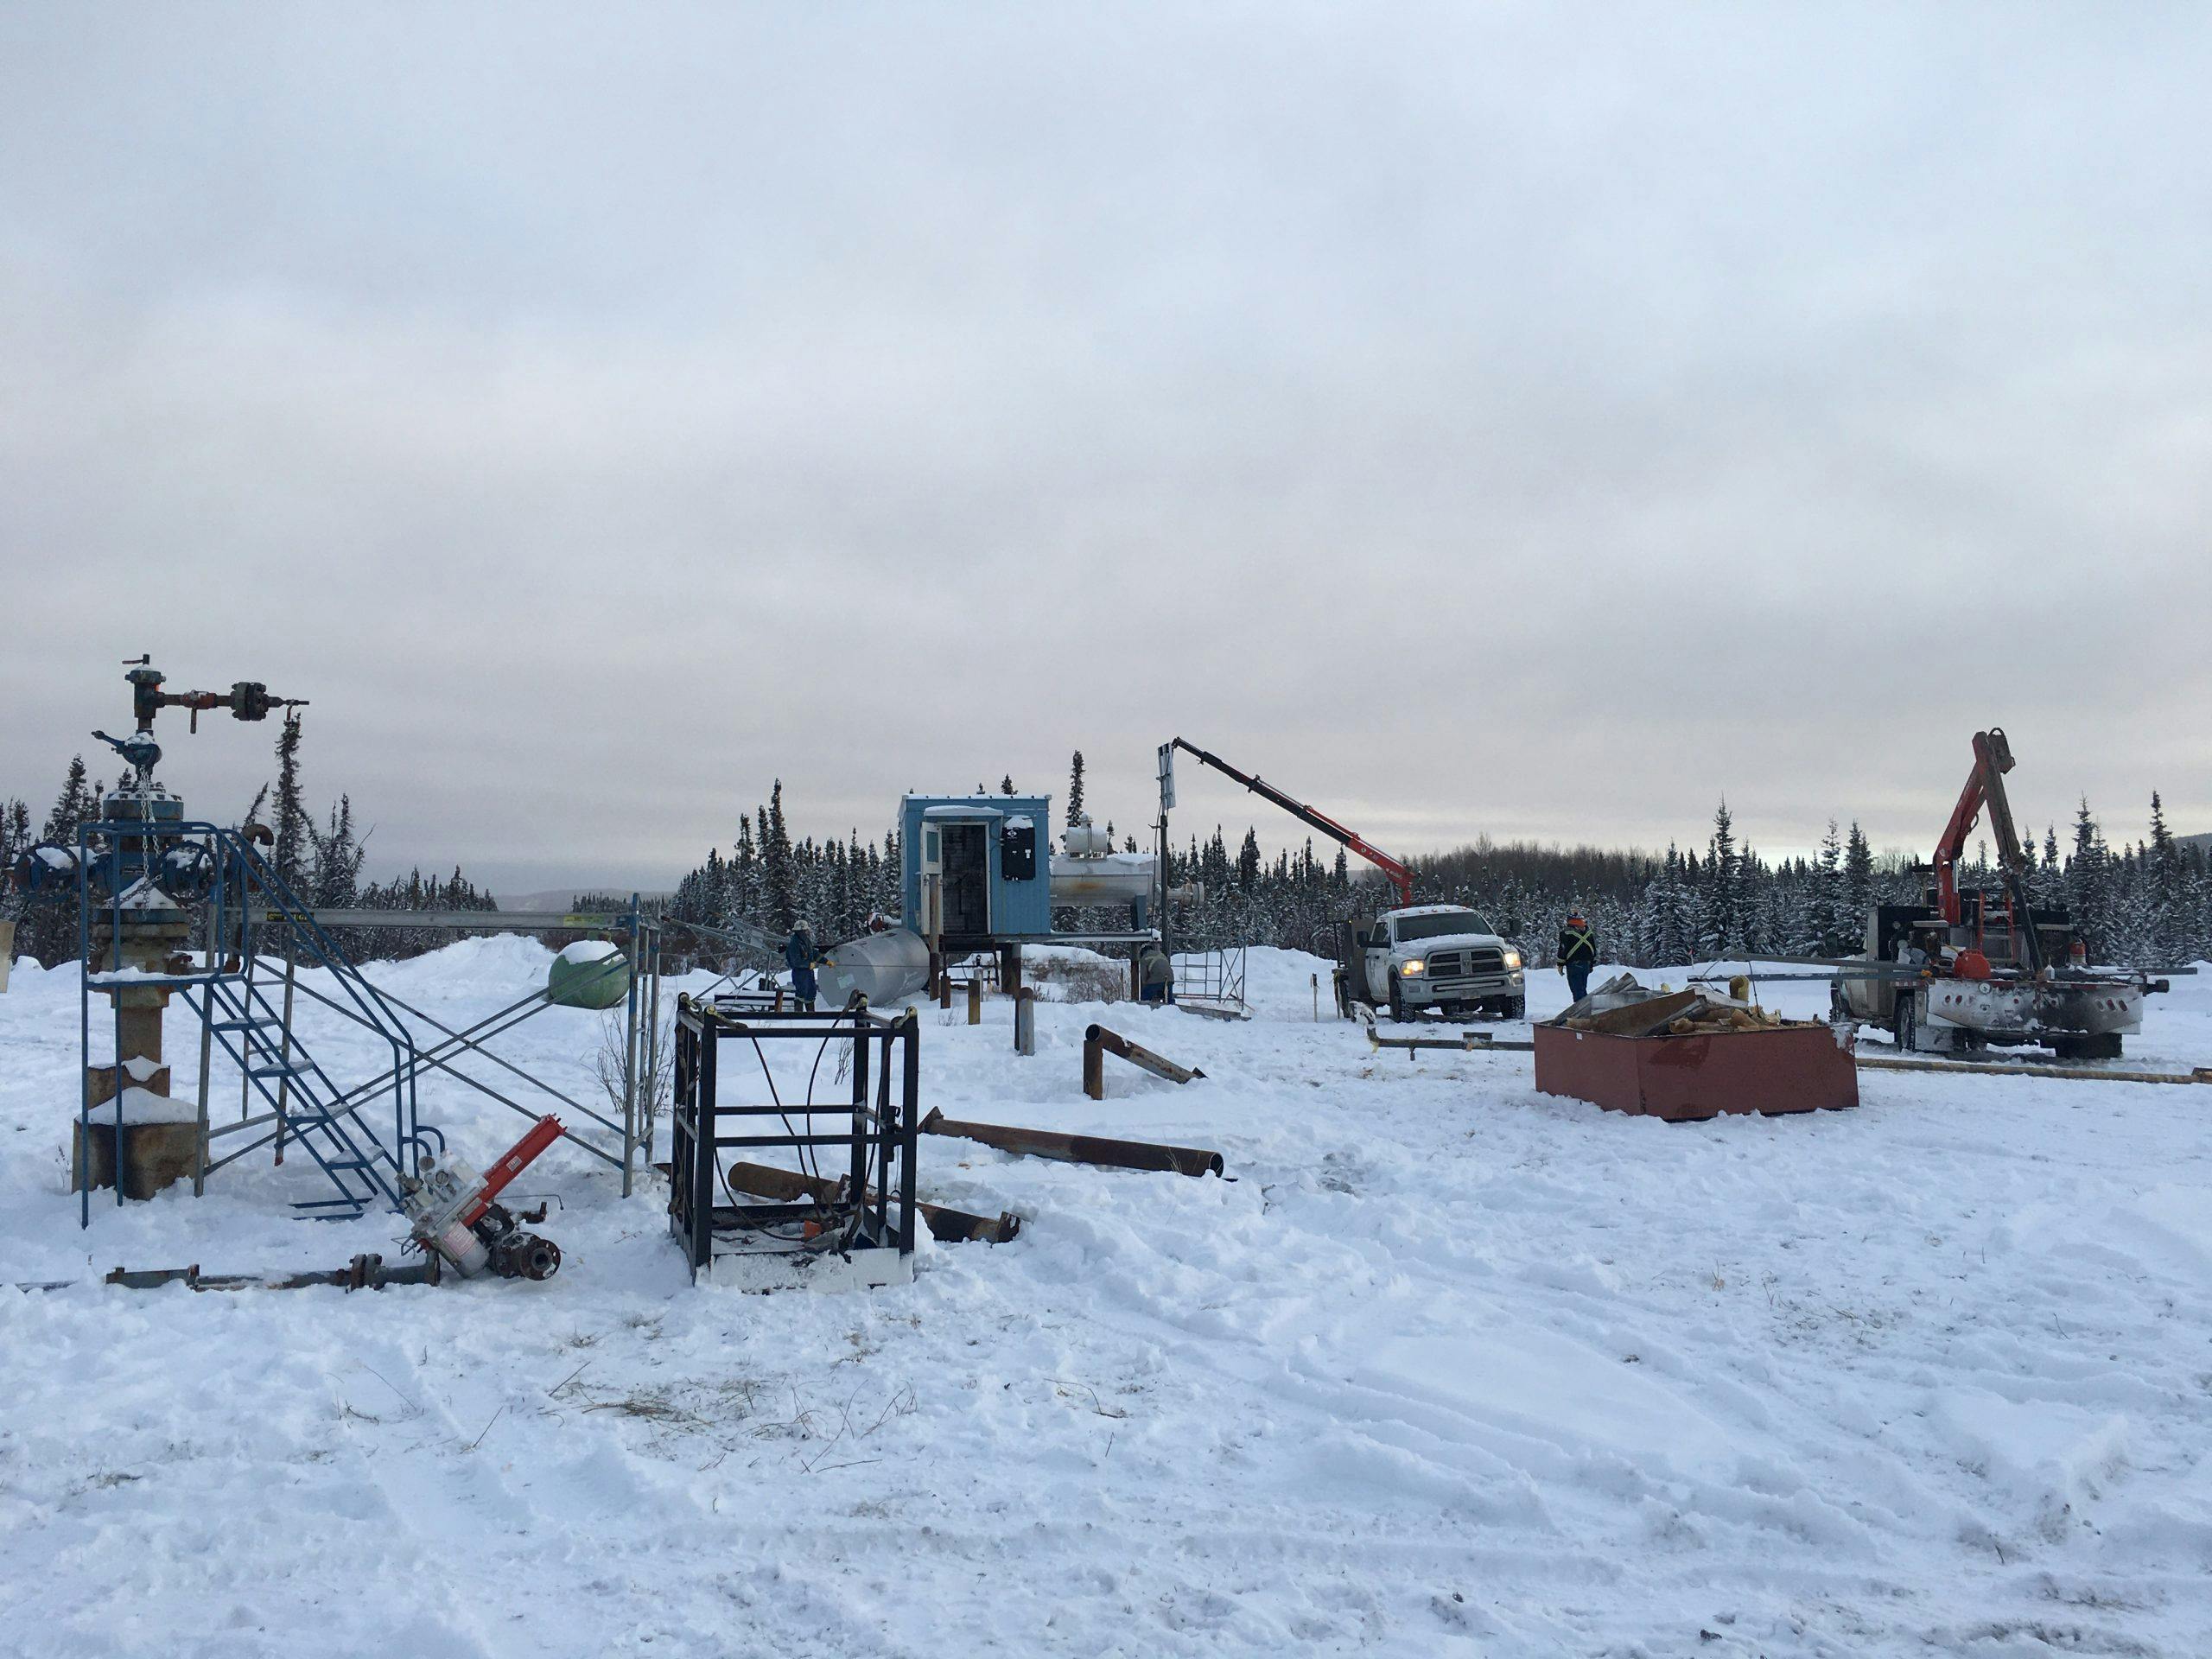 Crew decommissioning a wellsite in the winter